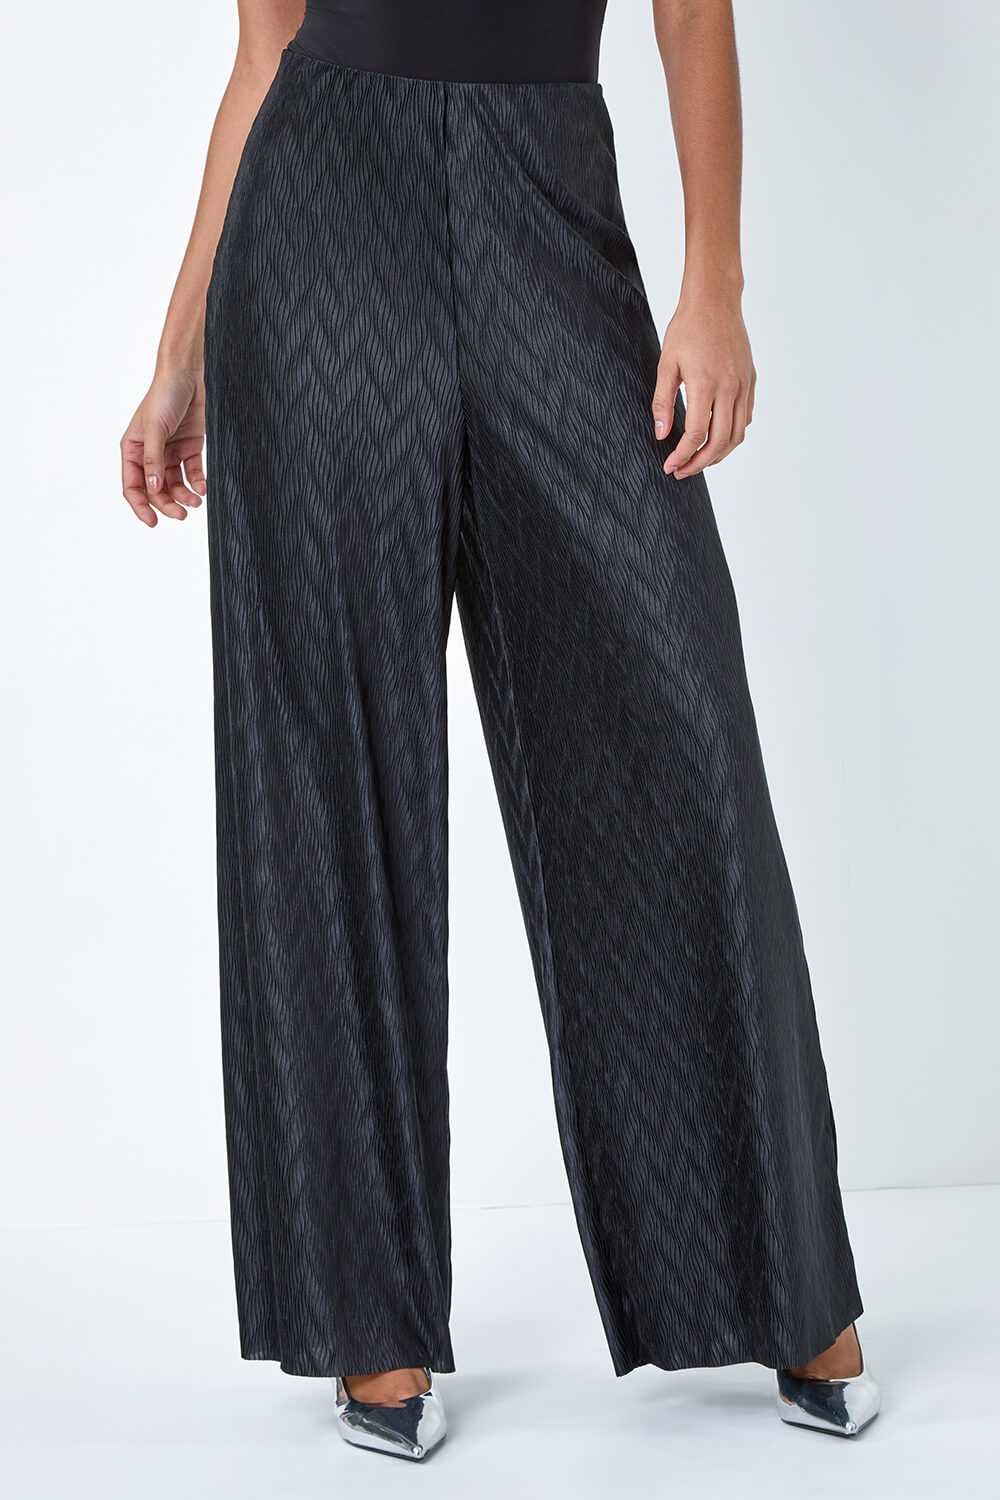 Black Plisse Wave Wide Leg Stretch Trousers, Image 4 of 5